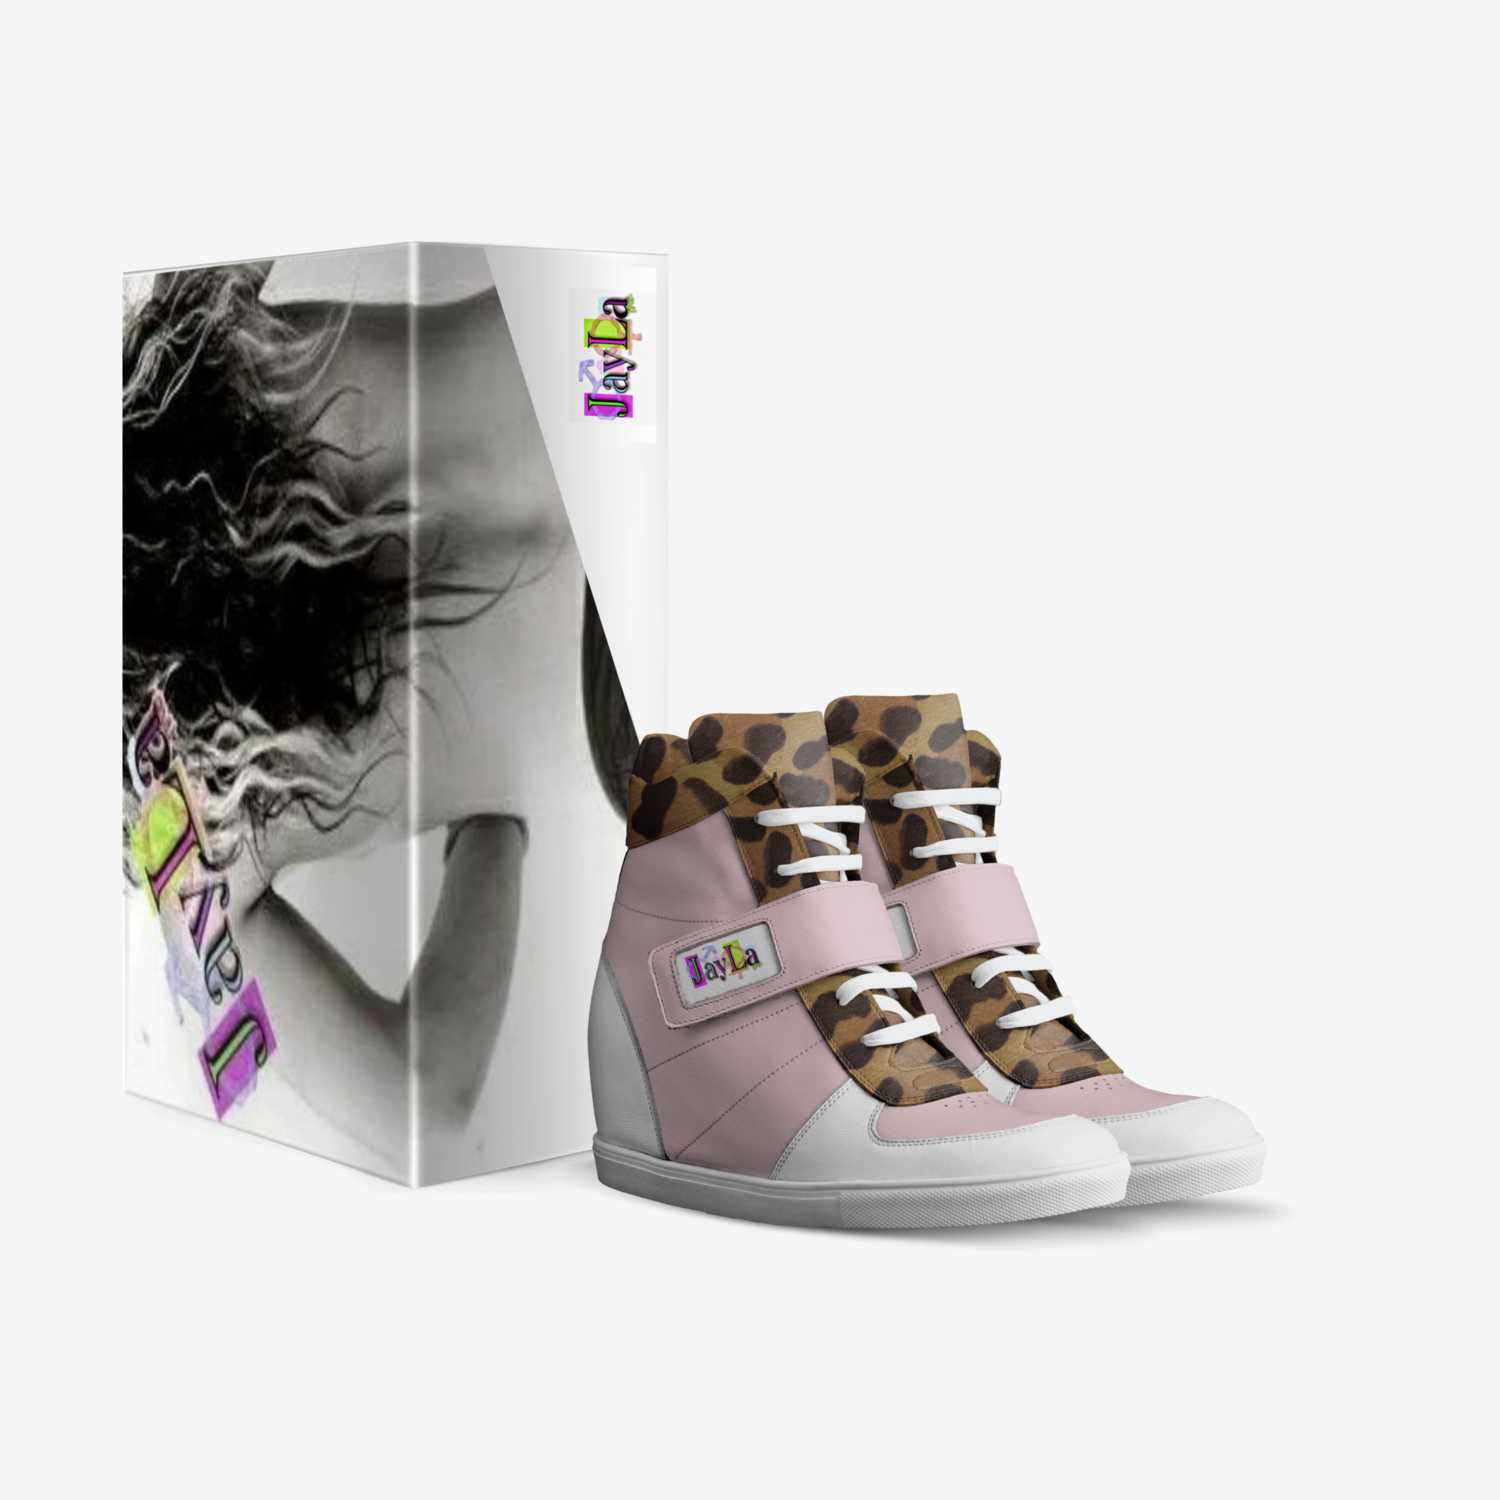 JayLa's Femella   custom made in Italy shoes by Jayla Inc | Box view